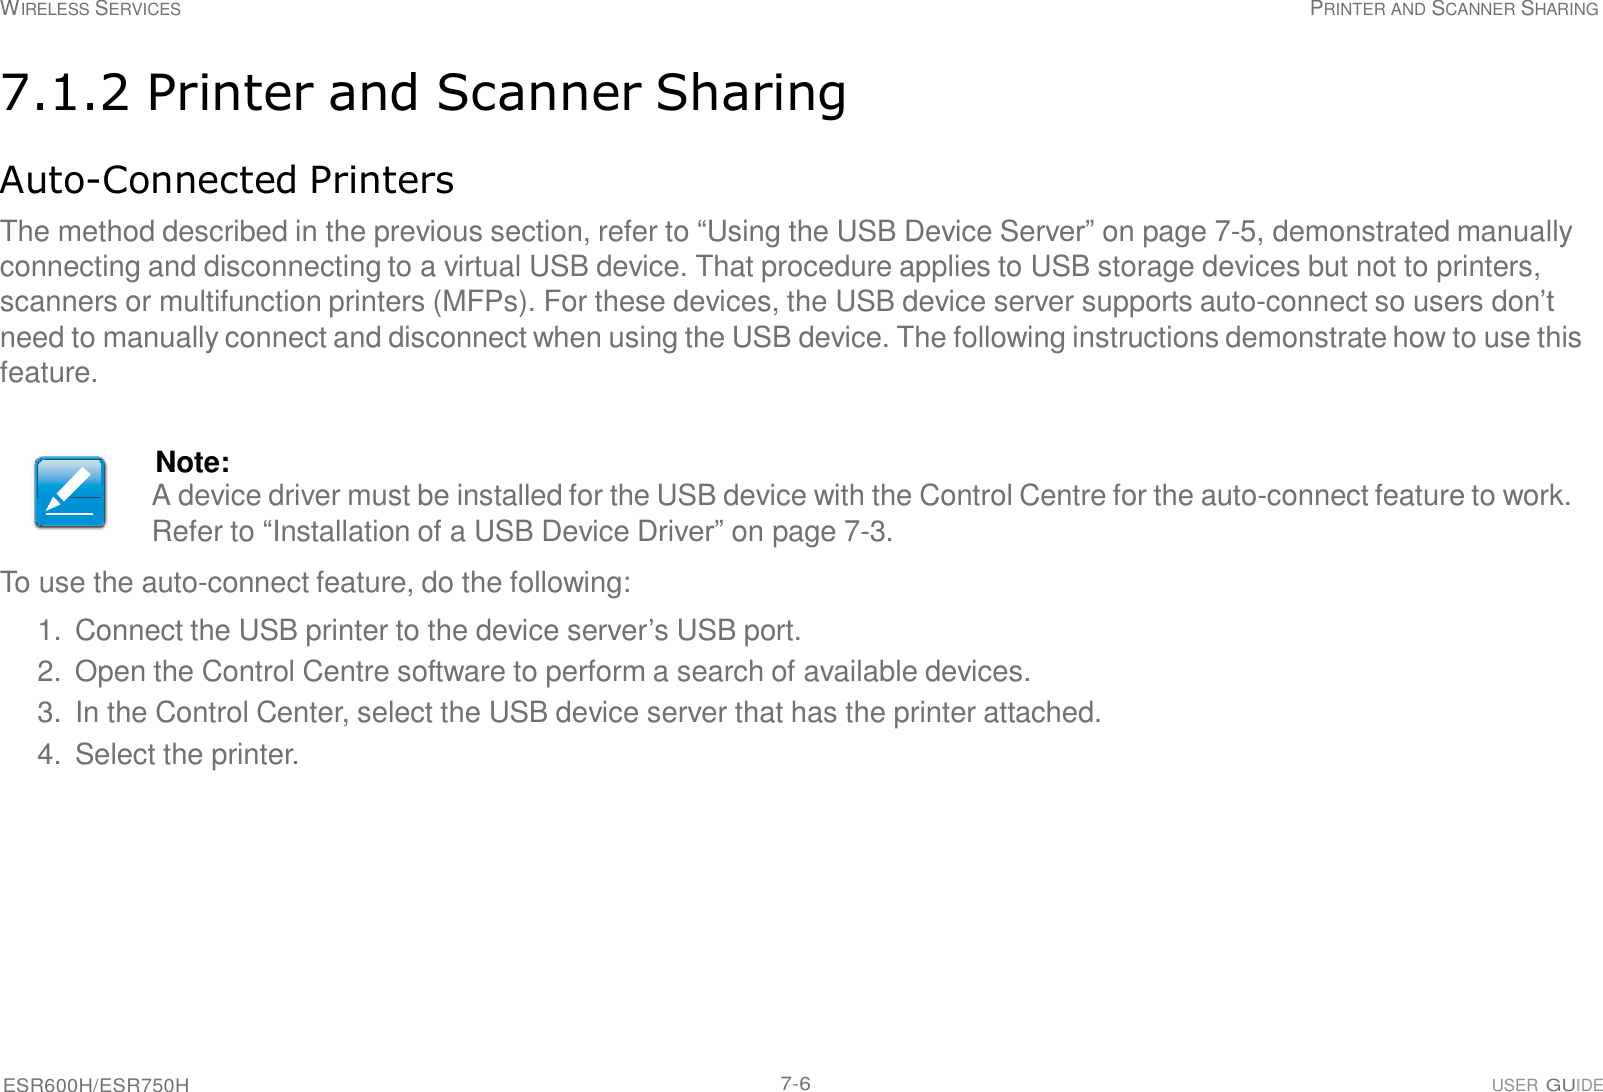 WIRELESS SERVICES PRINTER AND SCANNER SHARING ESR600H/ESR750H 7-6 USER GUIDE     7.1.2 Printer and Scanner Sharing   Auto-Connected Printers  The method described in the previous section, refer to “Using the USB Device Server” on page 7-5, demonstrated manually connecting and disconnecting to a virtual USB device. That procedure applies to USB storage devices but not to printers, scanners or multifunction printers (MFPs). For these devices, the USB device server supports auto-connect so users don’t need to manually connect and disconnect when using the USB device. The following instructions demonstrate how to use this feature.    Note: A device driver must be installed for the USB device with the Control Centre for the auto-connect feature to work. Refer to “Installation of a USB Device Driver” on page 7-3. To use the auto-connect feature, do the following: 1.  Connect the USB printer to the device server’s USB port. 2. Open the Control Centre software to perform a search of available devices. 3.  In the Control Center, select the USB device server that has the printer attached. 4. Select the printer. 